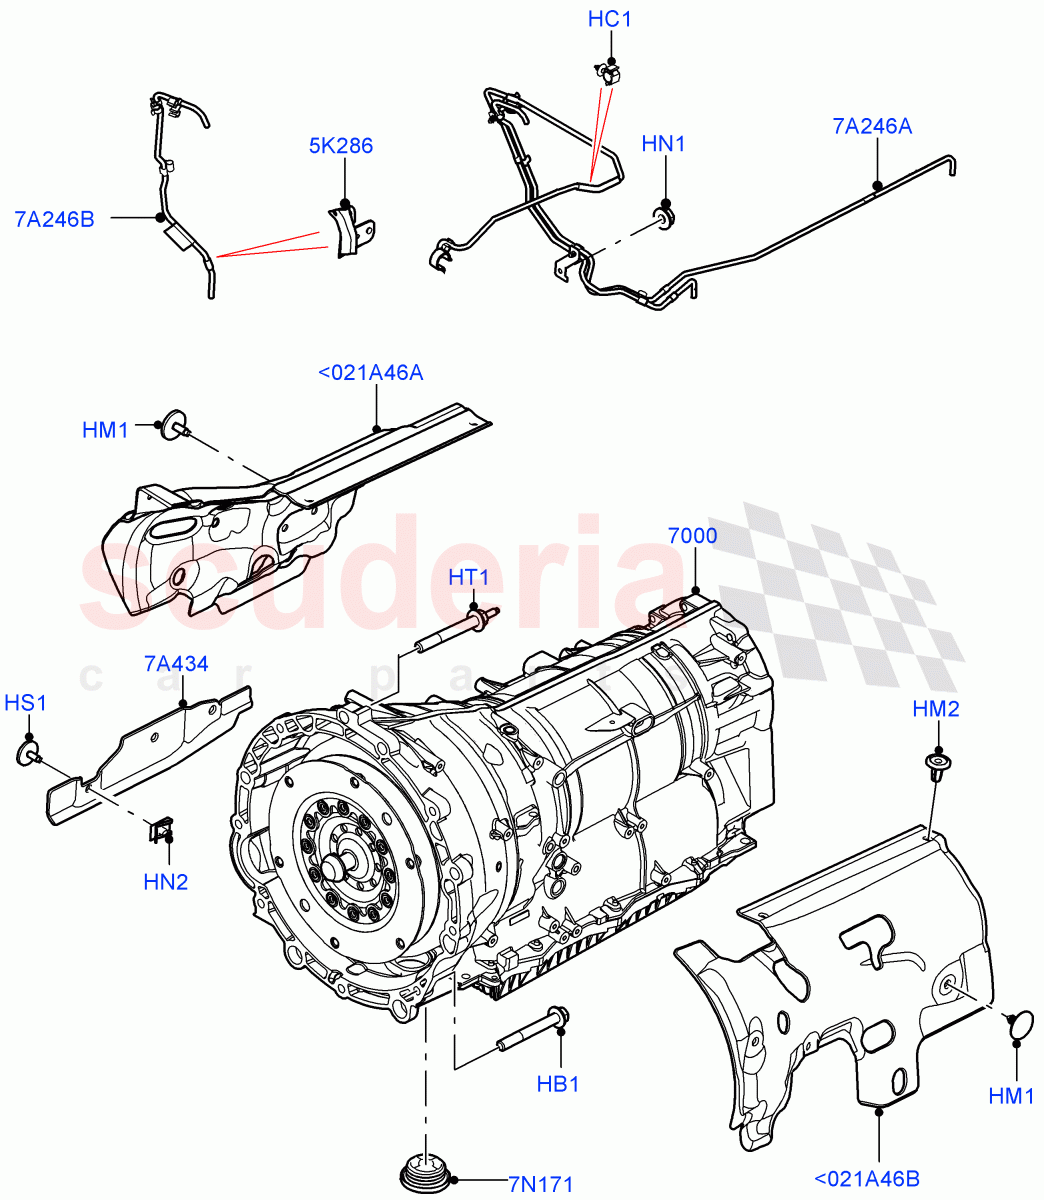 Auto Trans Assy & Speedometer Drive(Nitra Plant Build)(3.0L AJ20D6 Diesel High,8 Speed Auto Trans ZF 8HP76)((V)FROMM2000001) of Land Rover Land Rover Discovery 5 (2017+) [3.0 I6 Turbo Petrol AJ20P6]